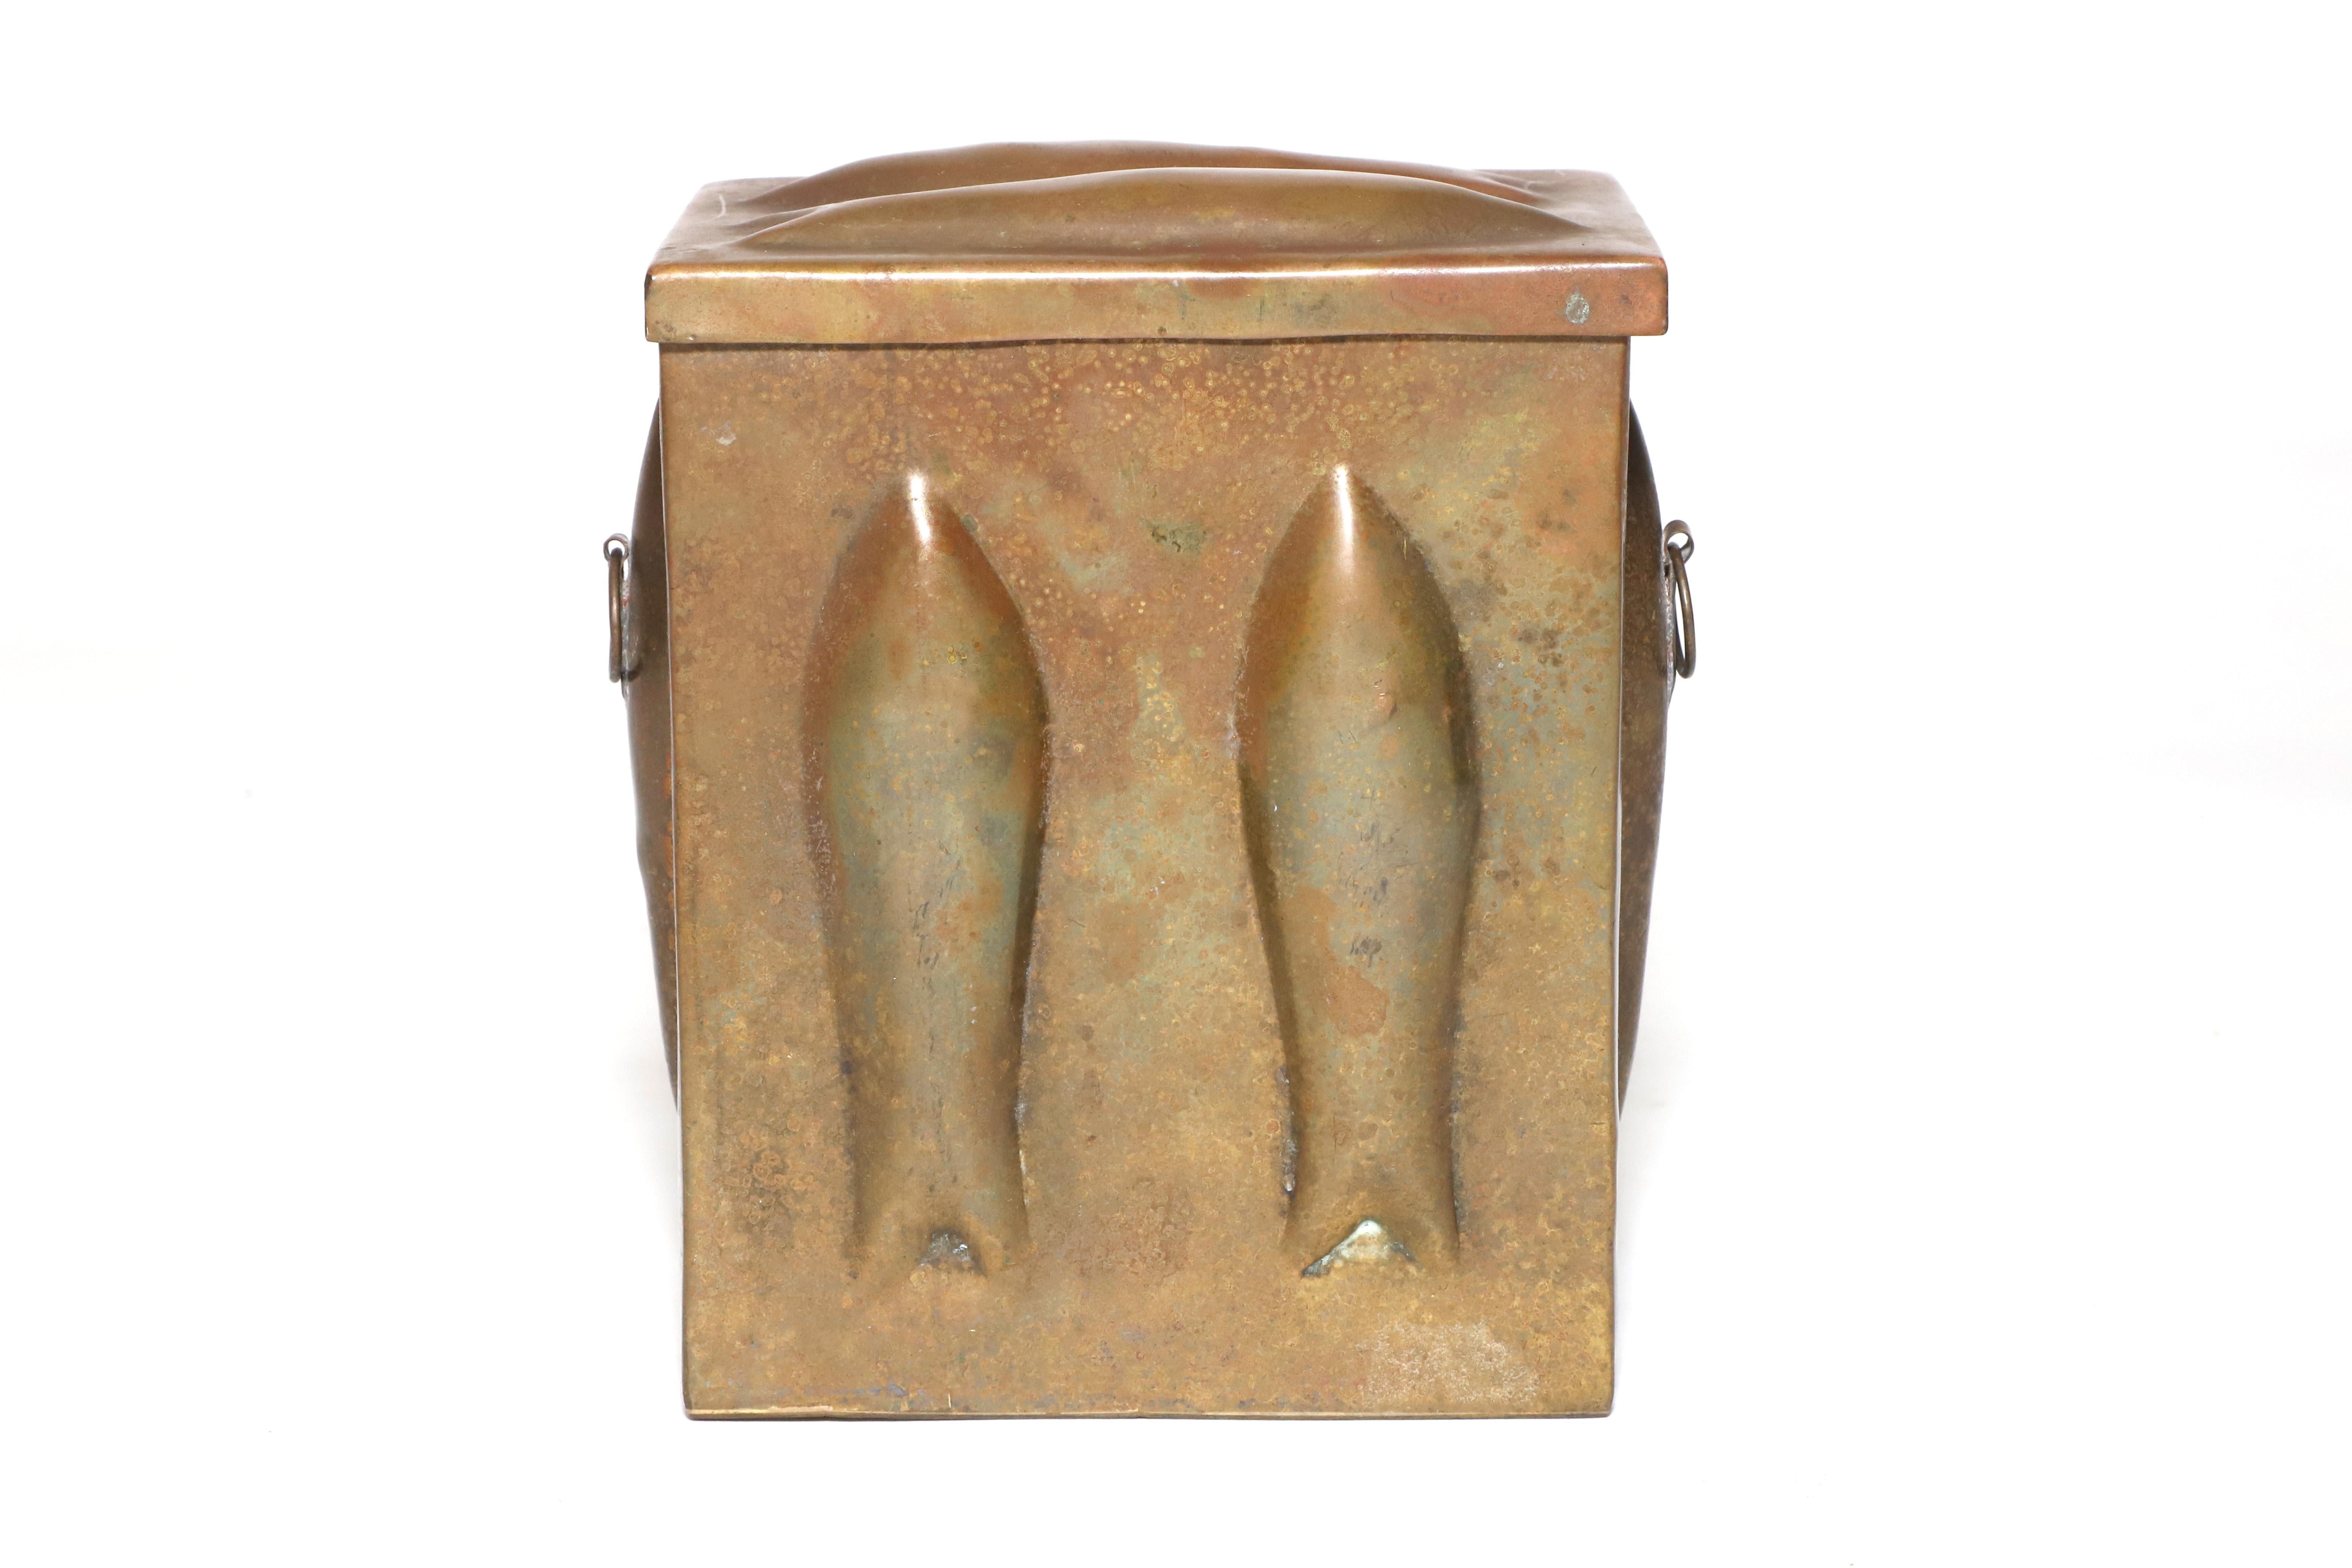 Decorative brass box made by Saks Fifth Avenua, India. Embossed with fish silhouttes on each face with two small brass circular handles on each side. Natural patina. 

Property from esteemed interior designer Juan Montoya. Juan Montoya is one of